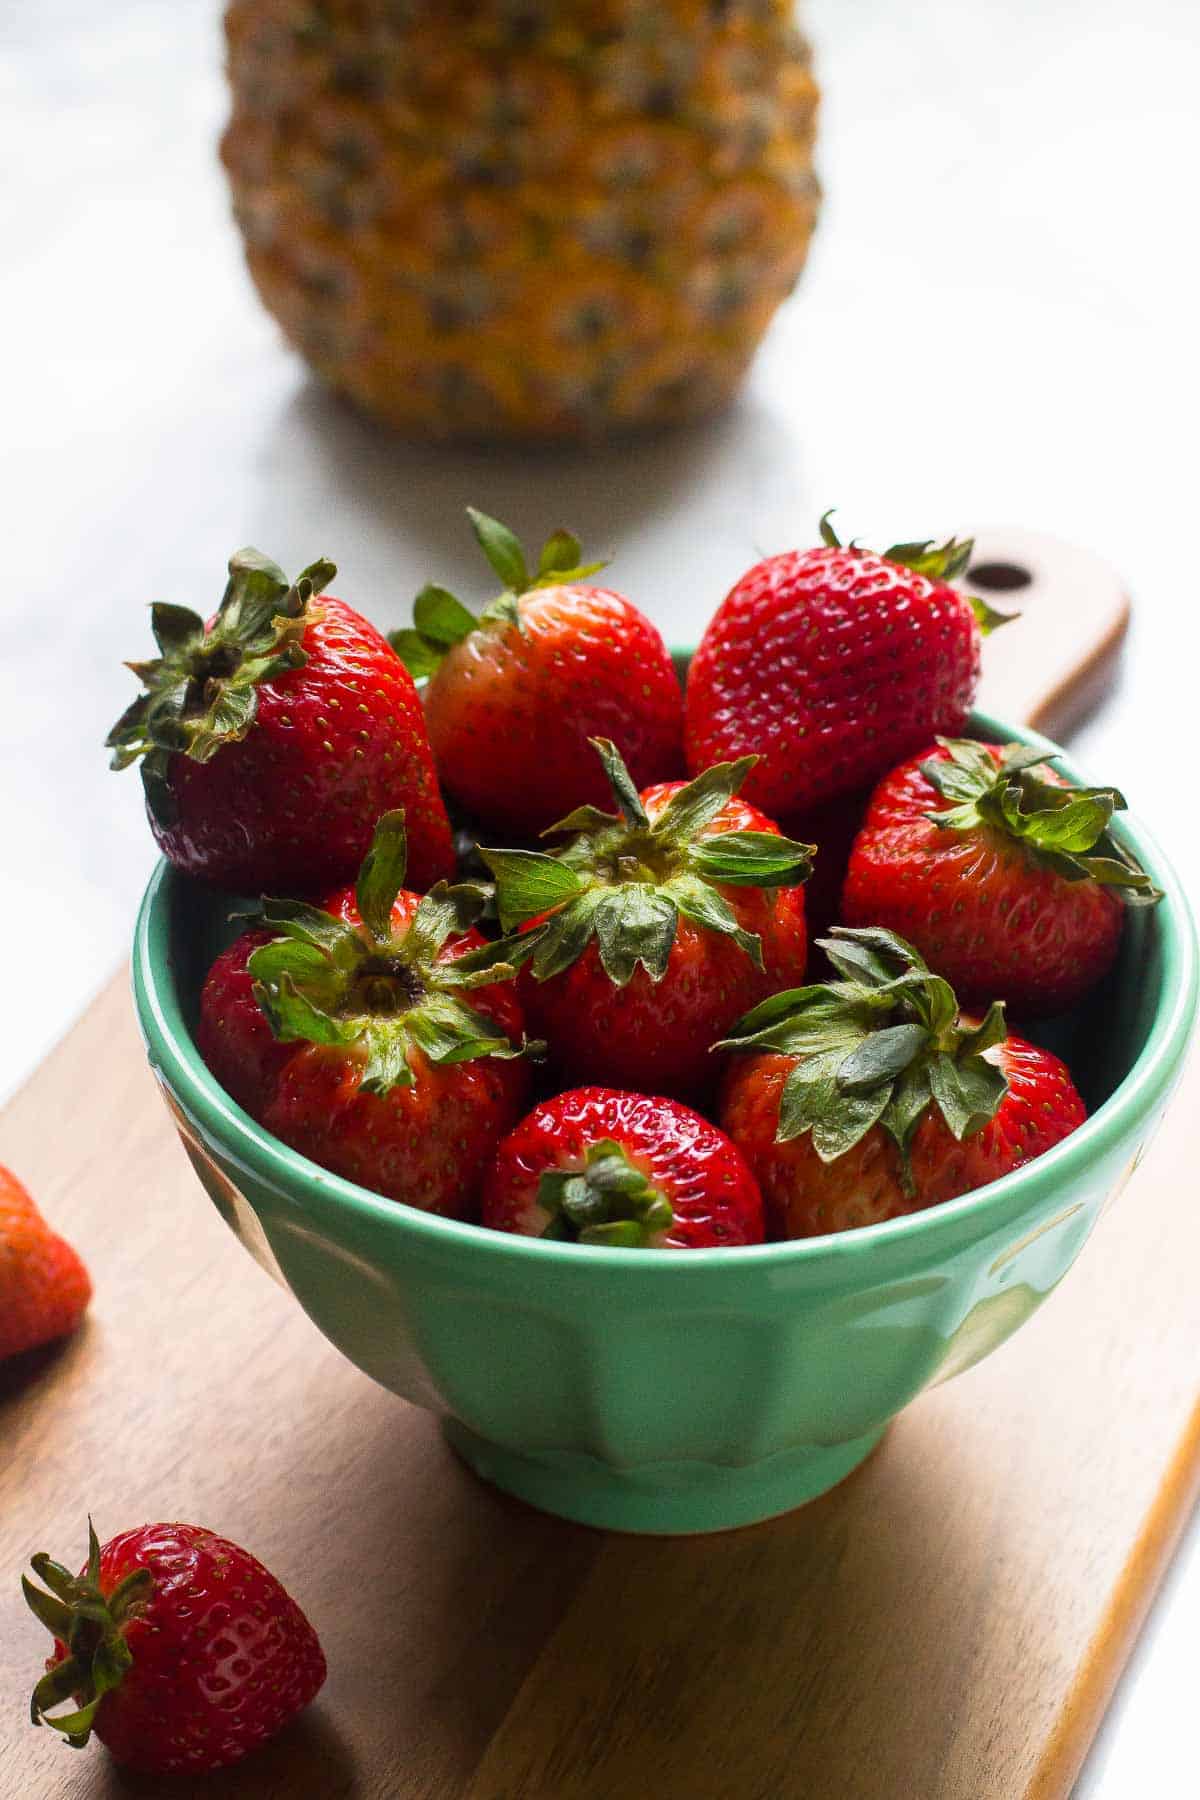 A blue bowl full of strawberries.